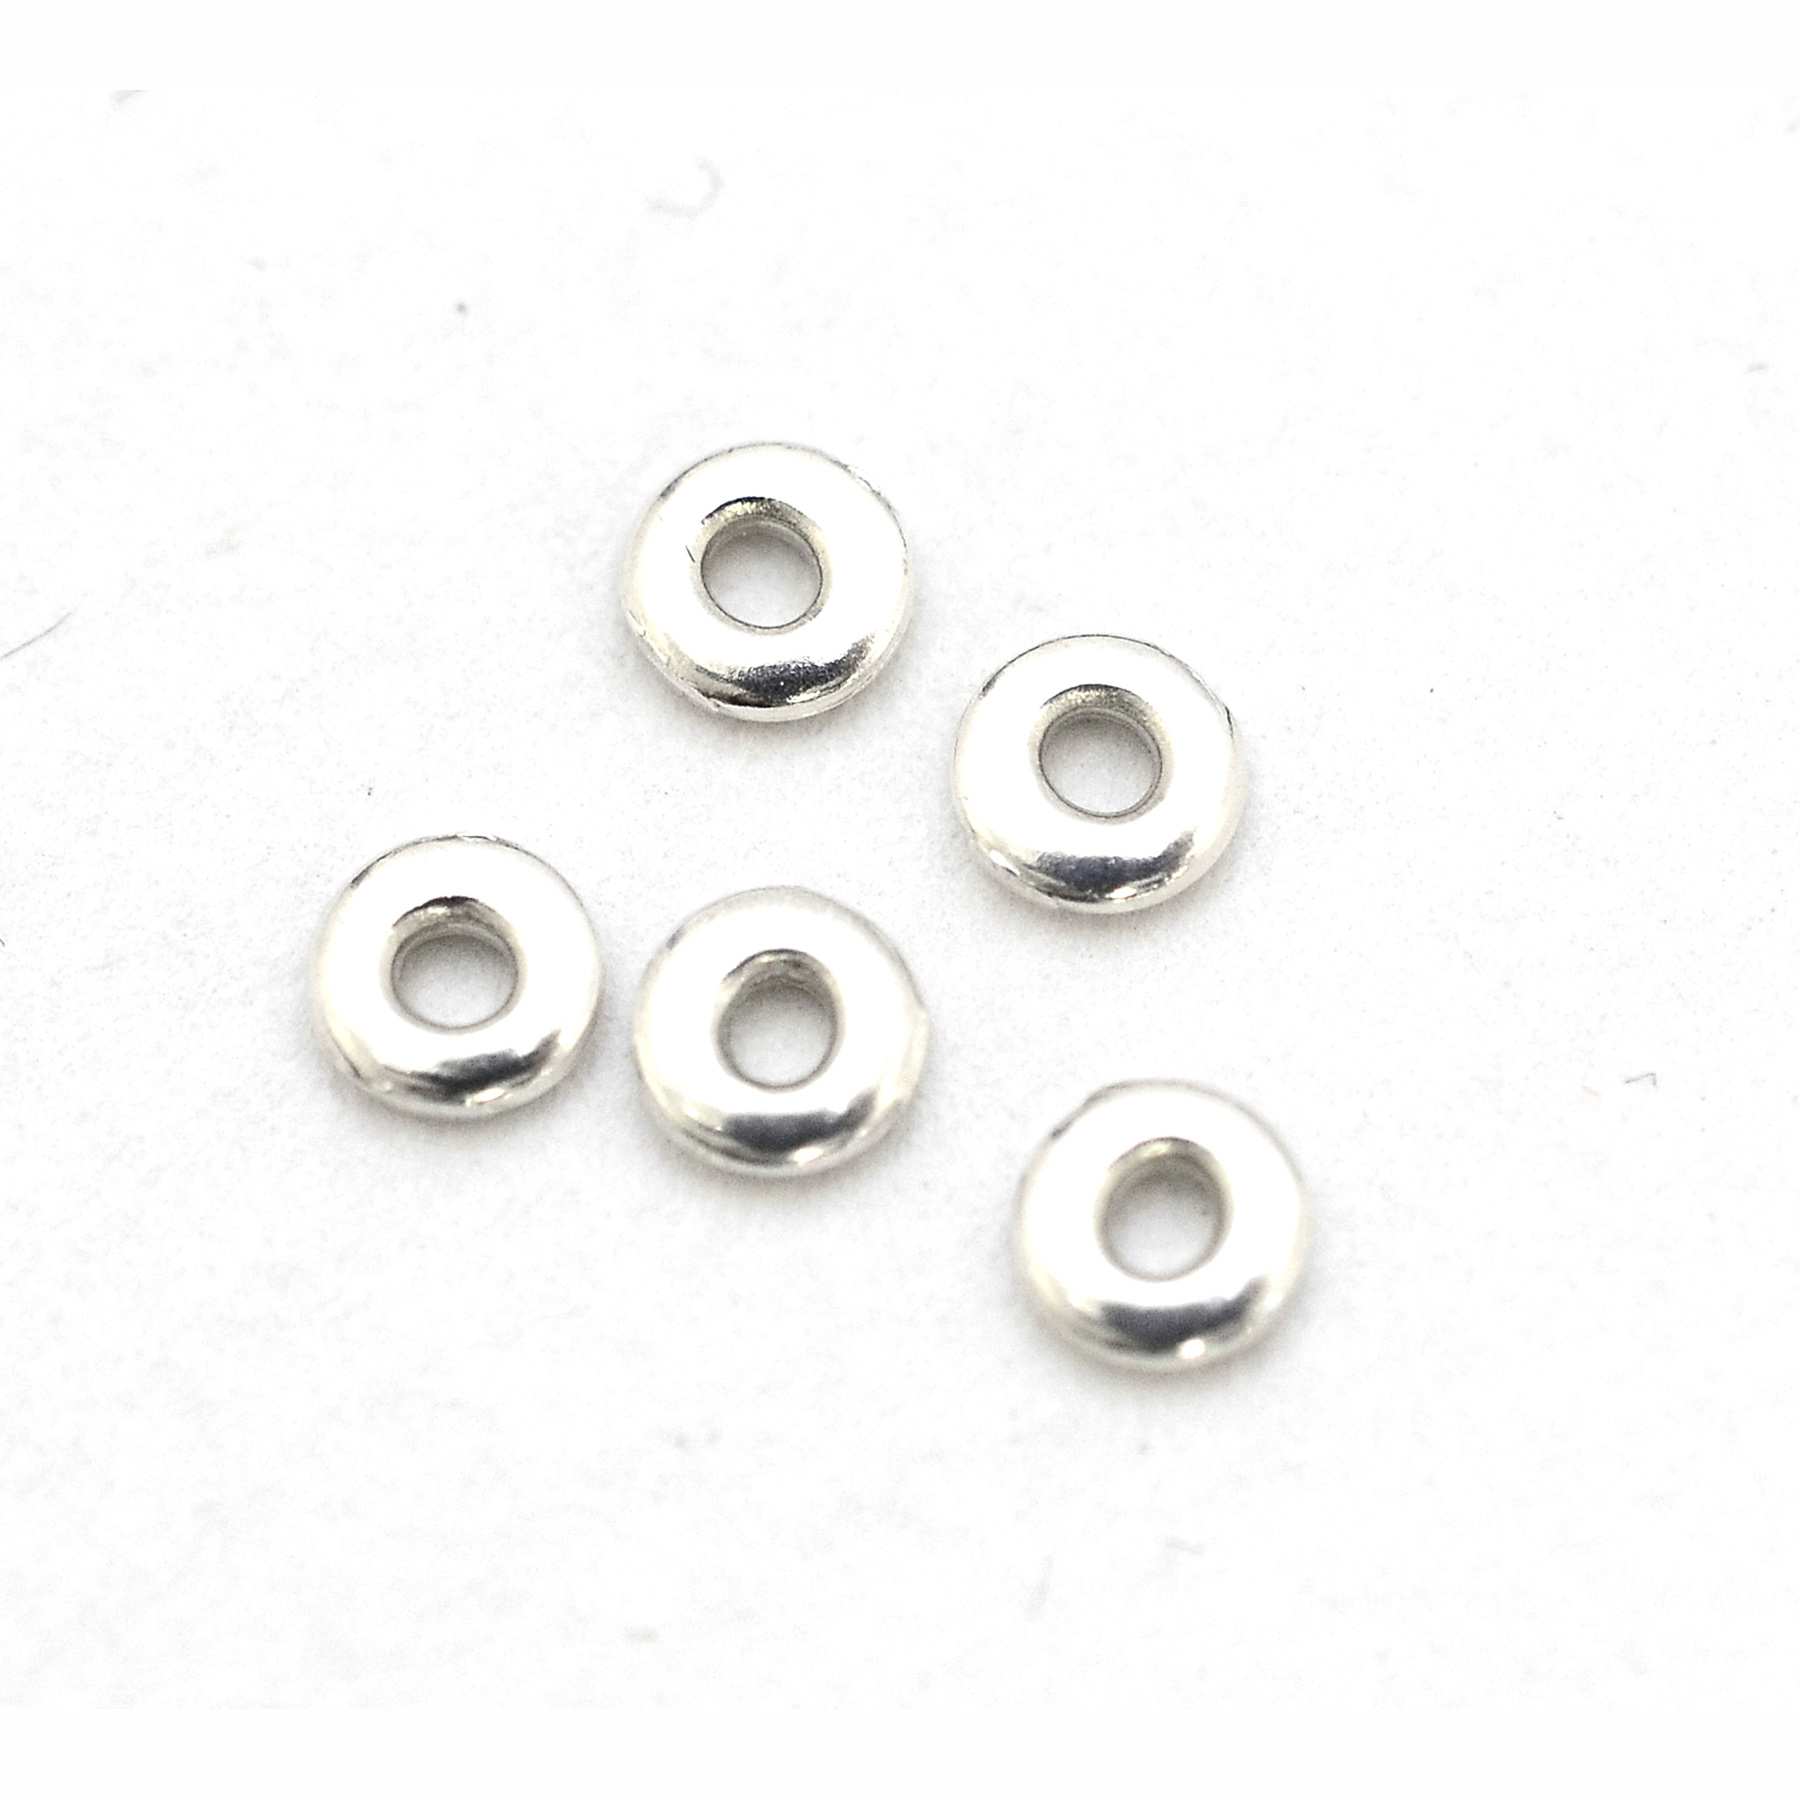 Sterling Silver Spacers,Sterling Silver Findings-Smooth Donut Shaped Beads-4 by 2mm Sterling Silver Beads -Wholesale-SKU: 211021-04 15 pcs